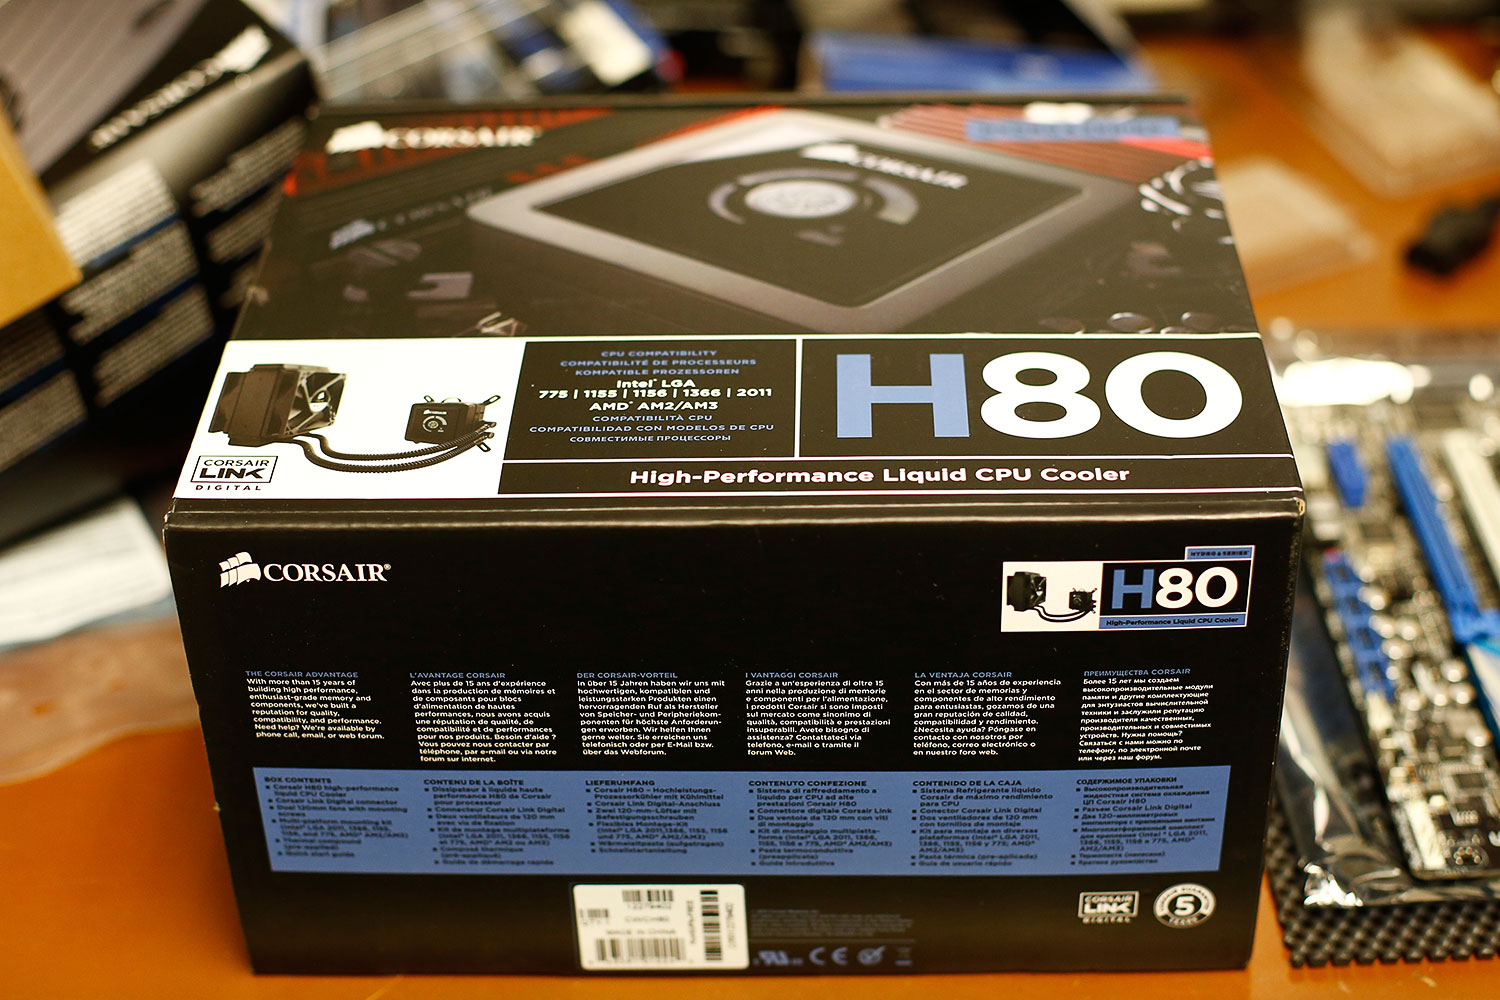 The&nbsp;Corsair H80 Hydro CPU Liquid Cooling System still inside its box and just before installing it inside my new computer.